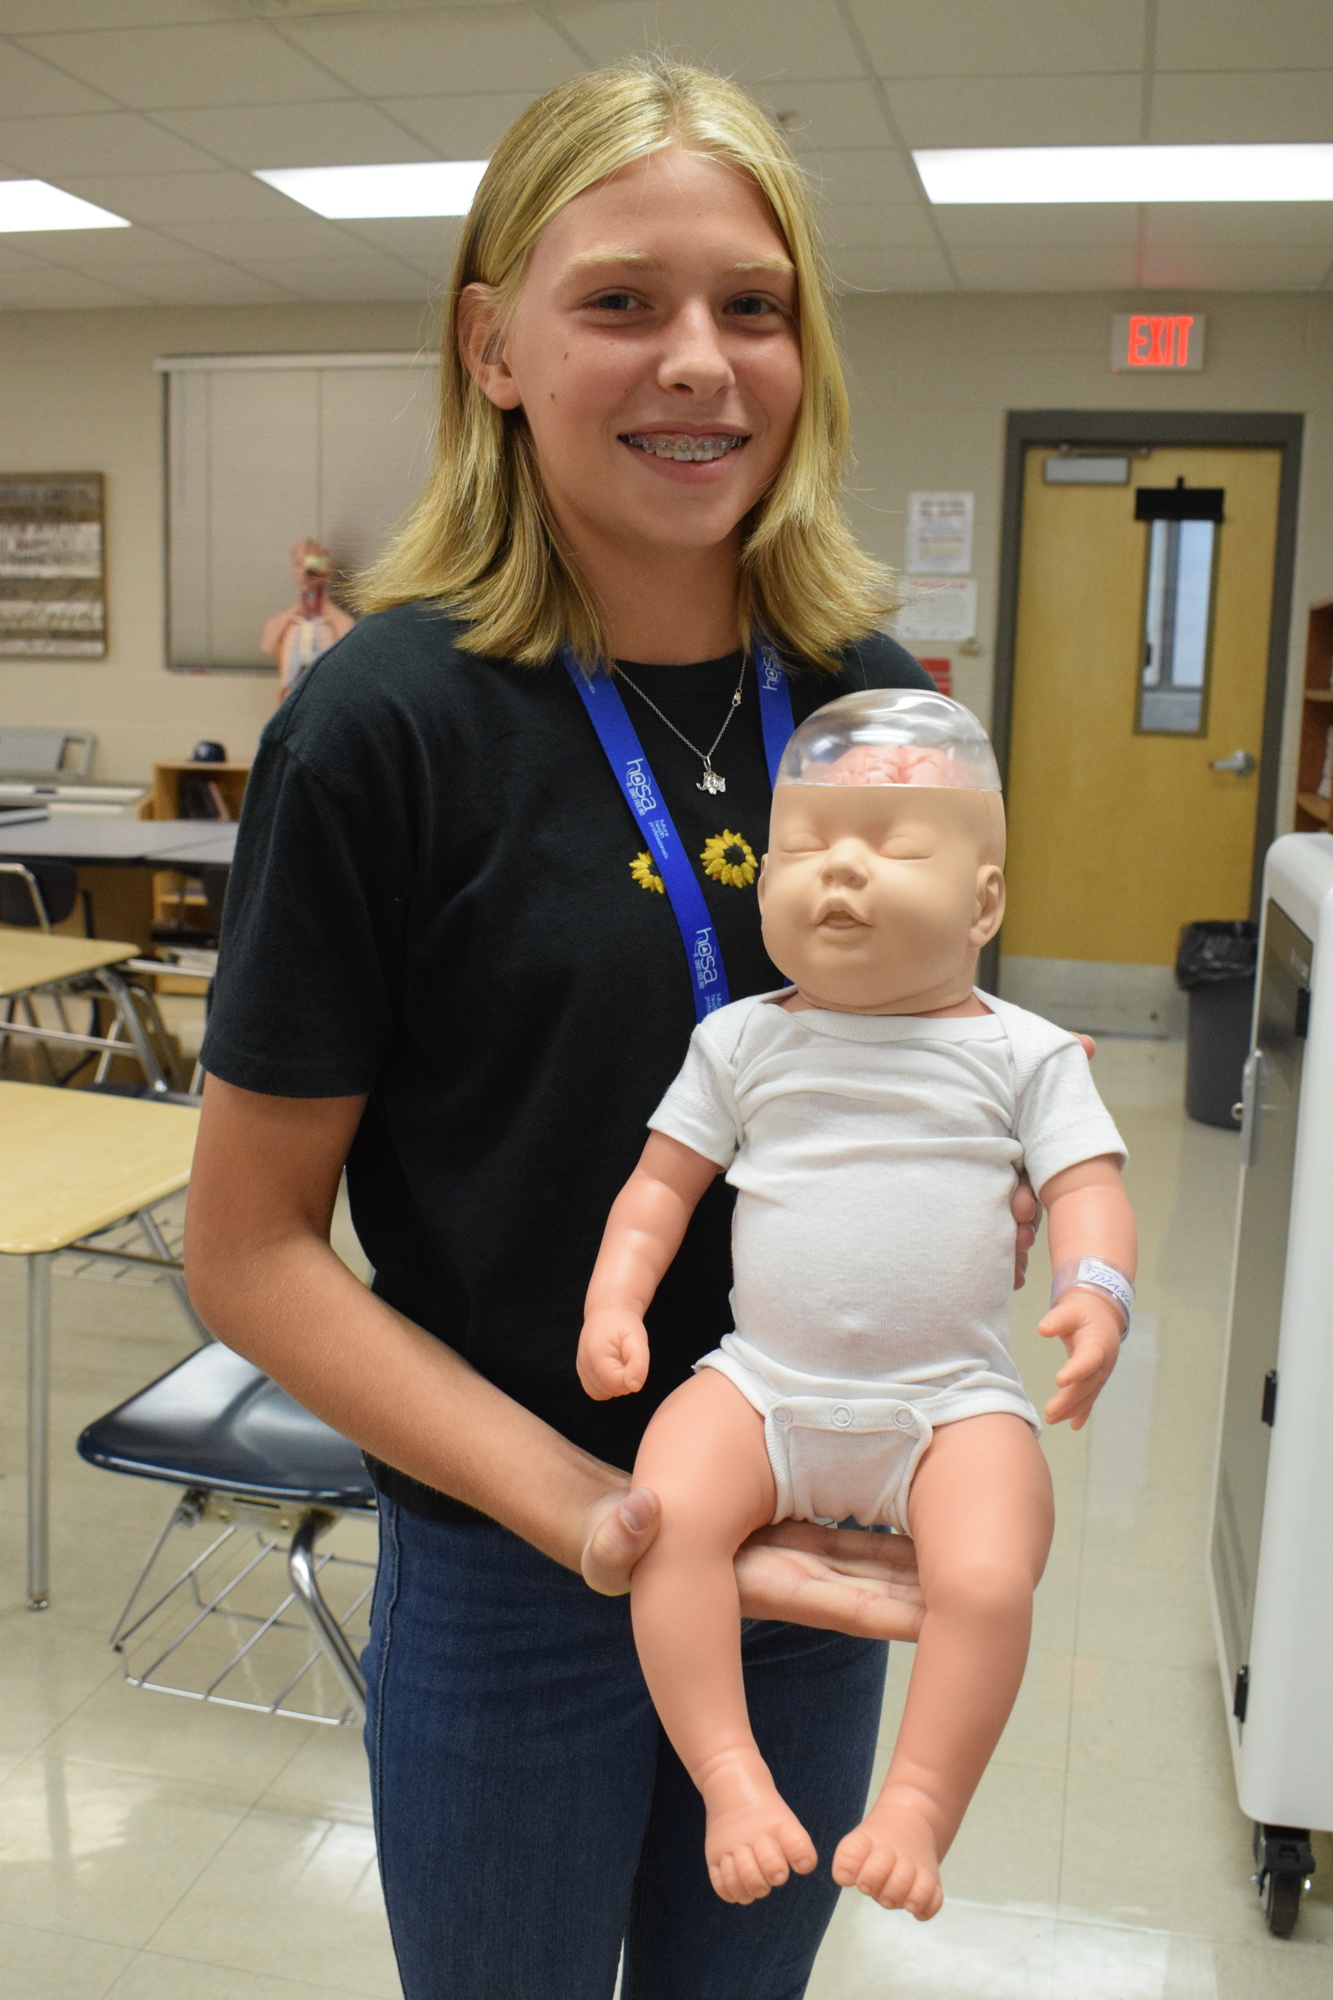 Payton Gee, an eighth grader at R. Dan Nolan Middle School, can learn how shaken baby syndrome impacts a baby's brain using a baby mannequin that was purchased using funding from the 1-mill ad valorem tax.